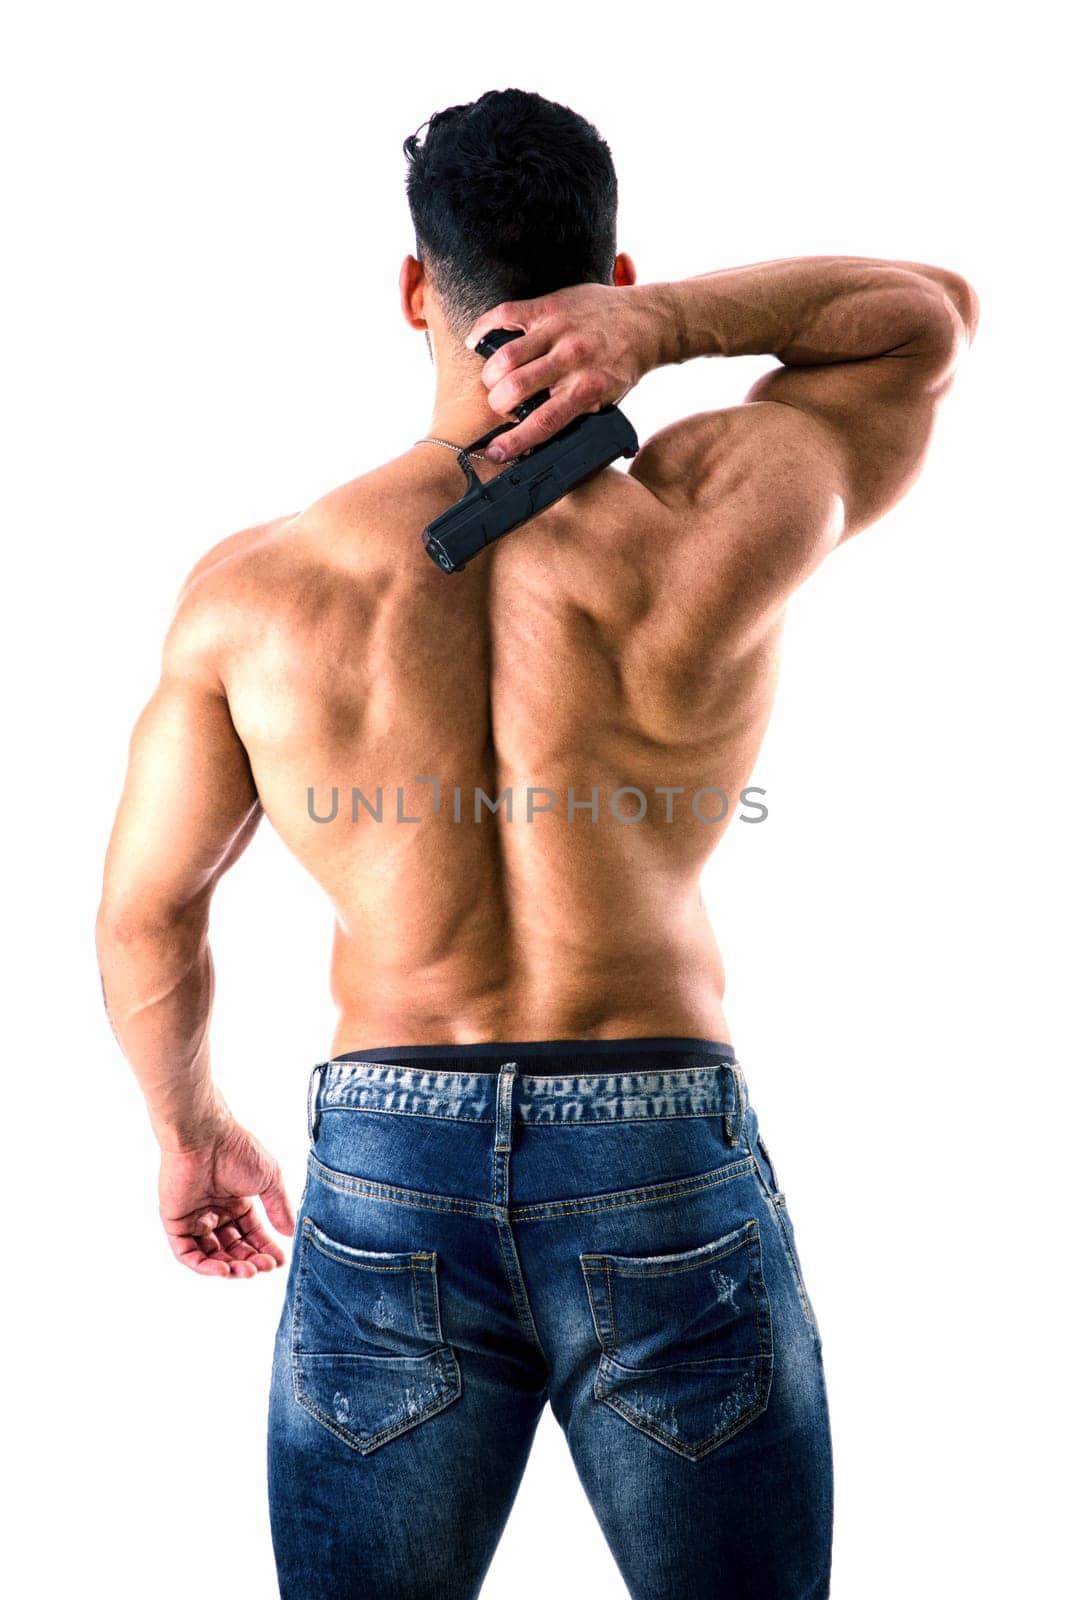 Handsome man with naked muscular torso holding hand gun, on white background, seen from the back